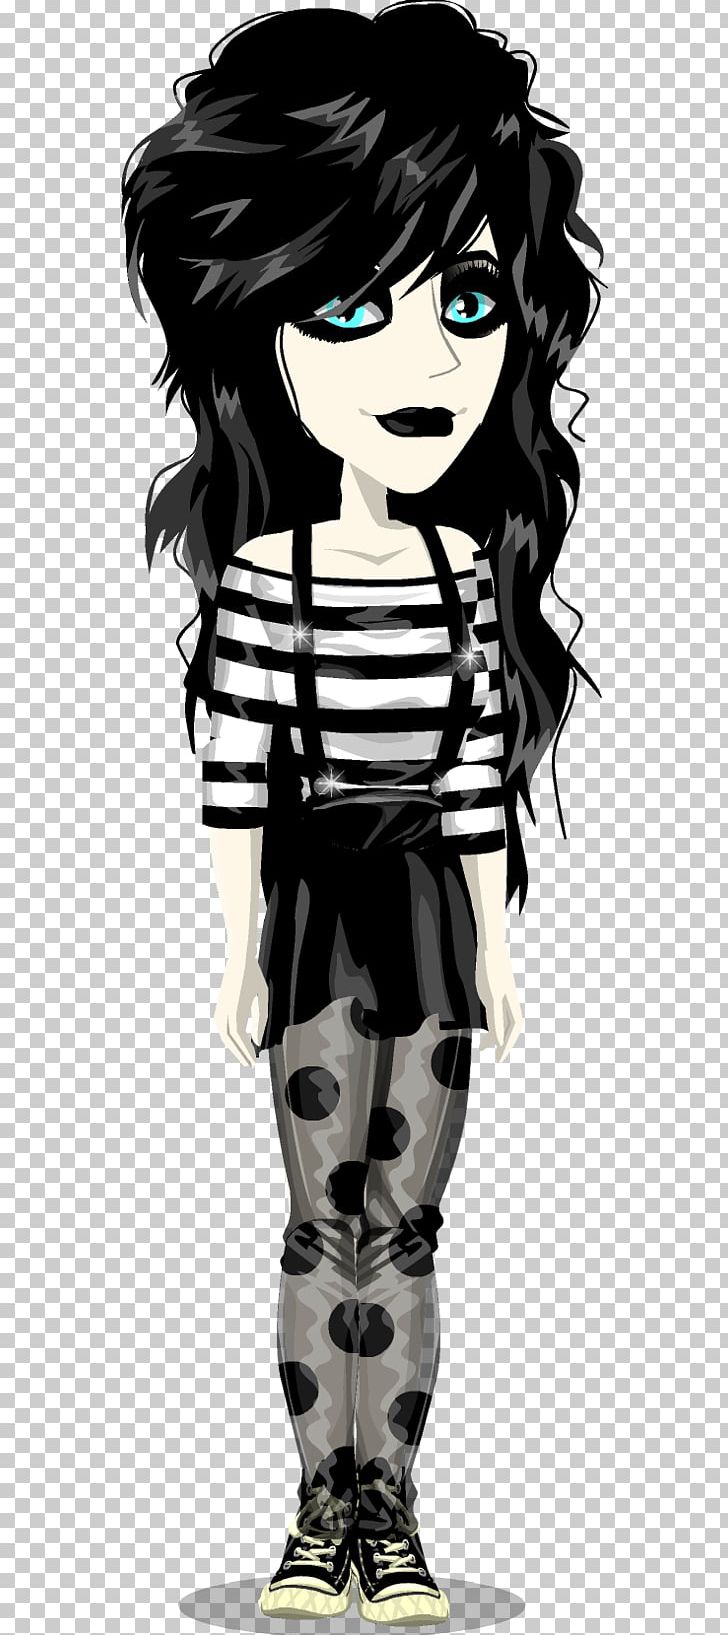 Laughing Jack Creepypasta Photography PNG, Clipart, Art, Artist, Bella Thorne, Black, Black And White Free PNG Download